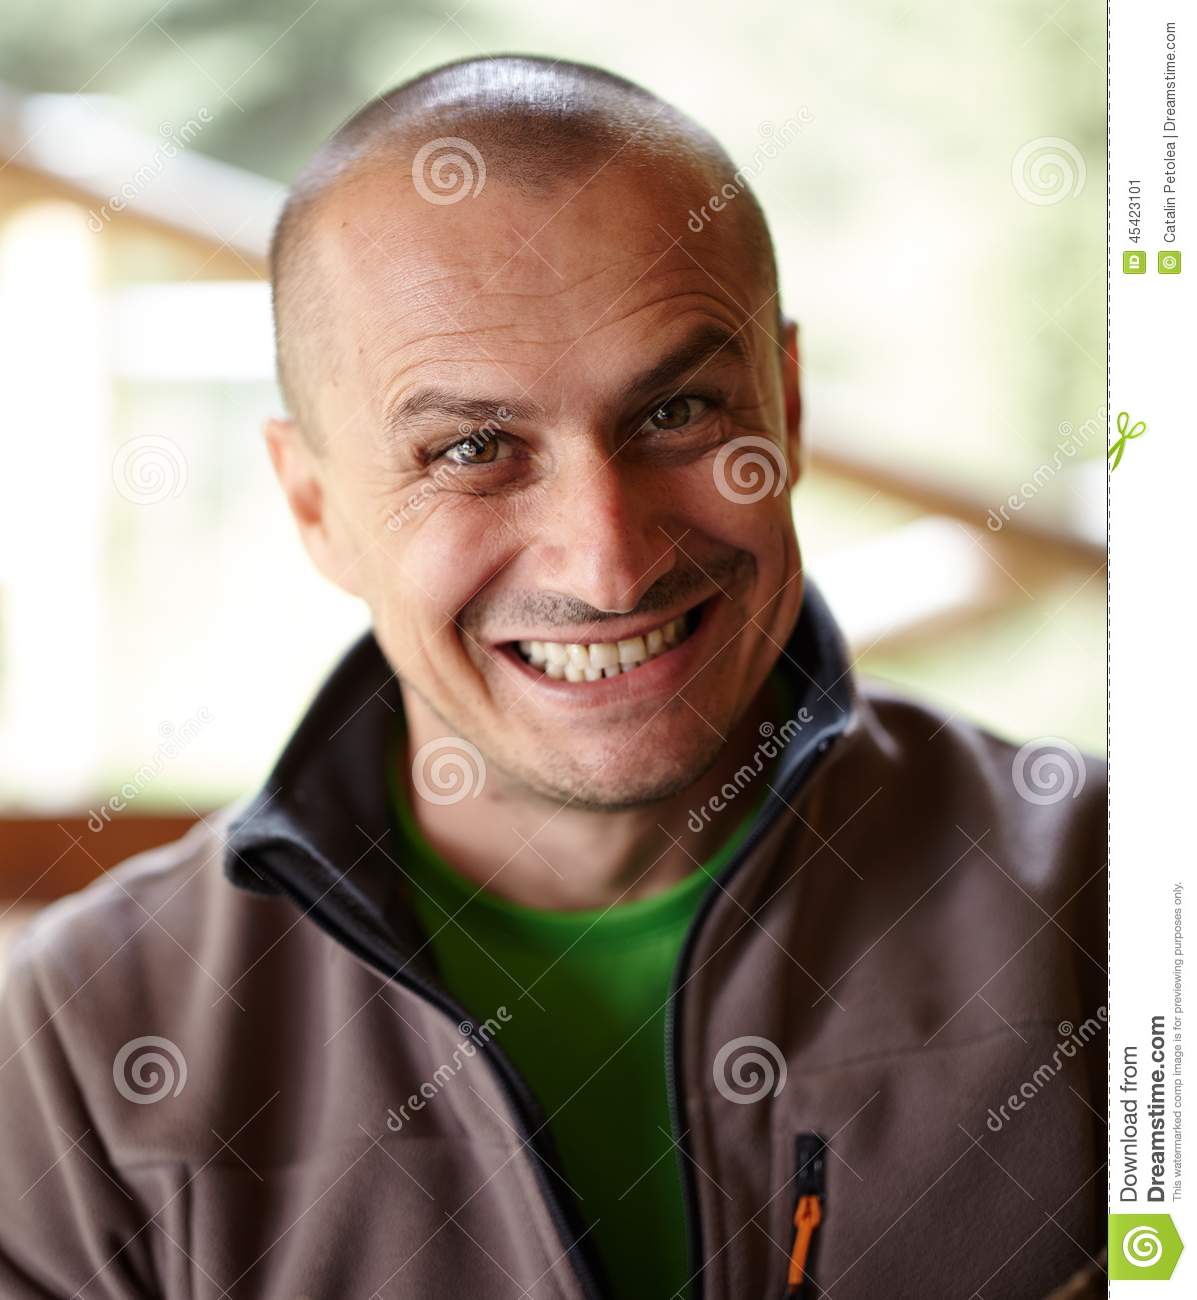 Closeup Of A Caucasian Man Outdoor With A Funny Grin